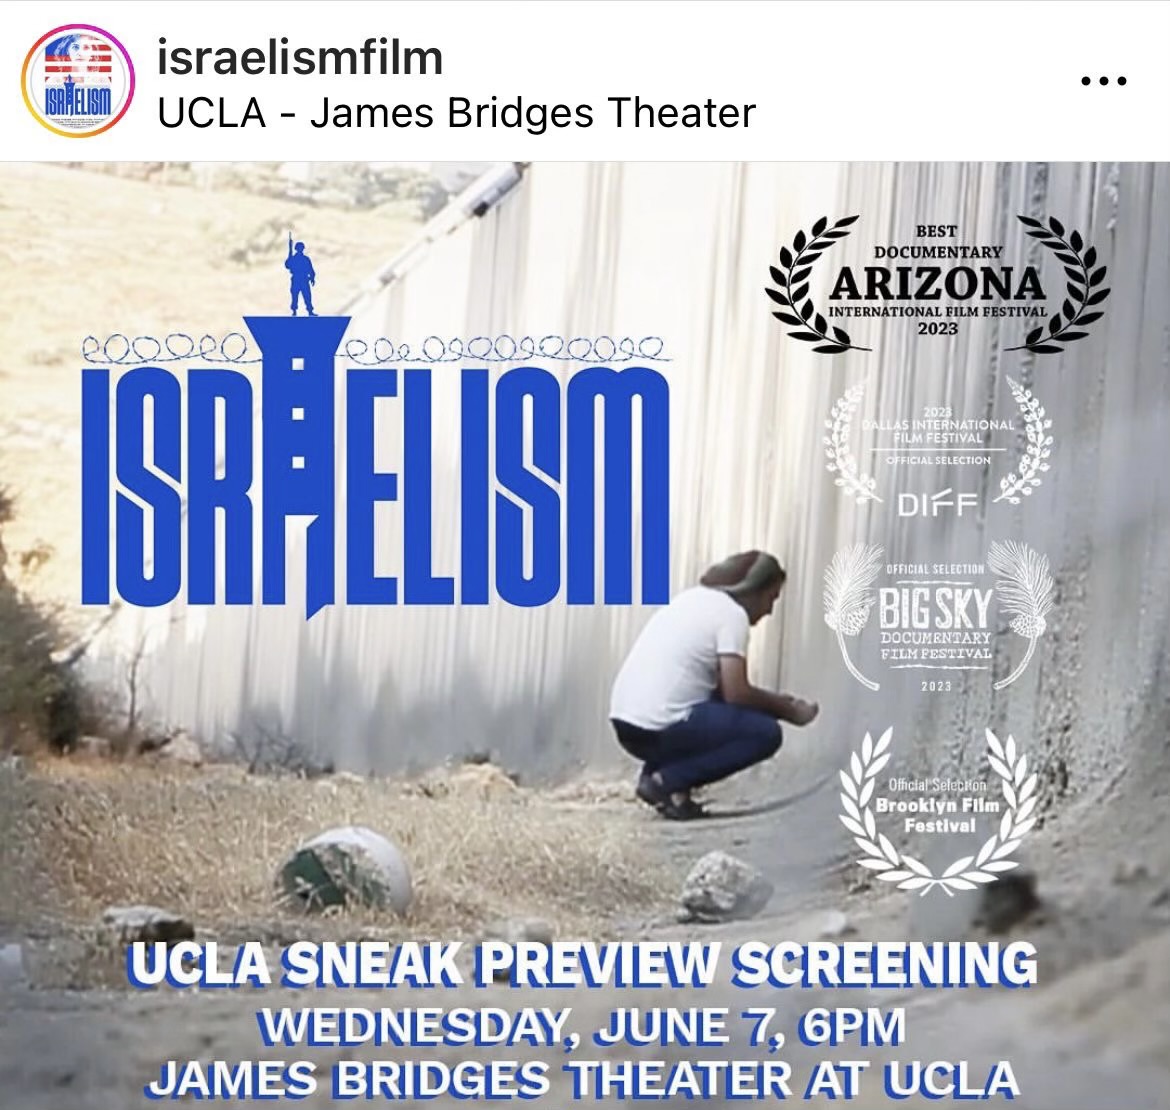 We are horrified the UCLA Israel Studies Program has allowed the screening of this grossly distorted film that will do nothing but fuel MORE Jew hatred at UCLA

Dozens of students have contacted us begging to cancel this screening, fearing for their safety!

@sharon_nazarian…